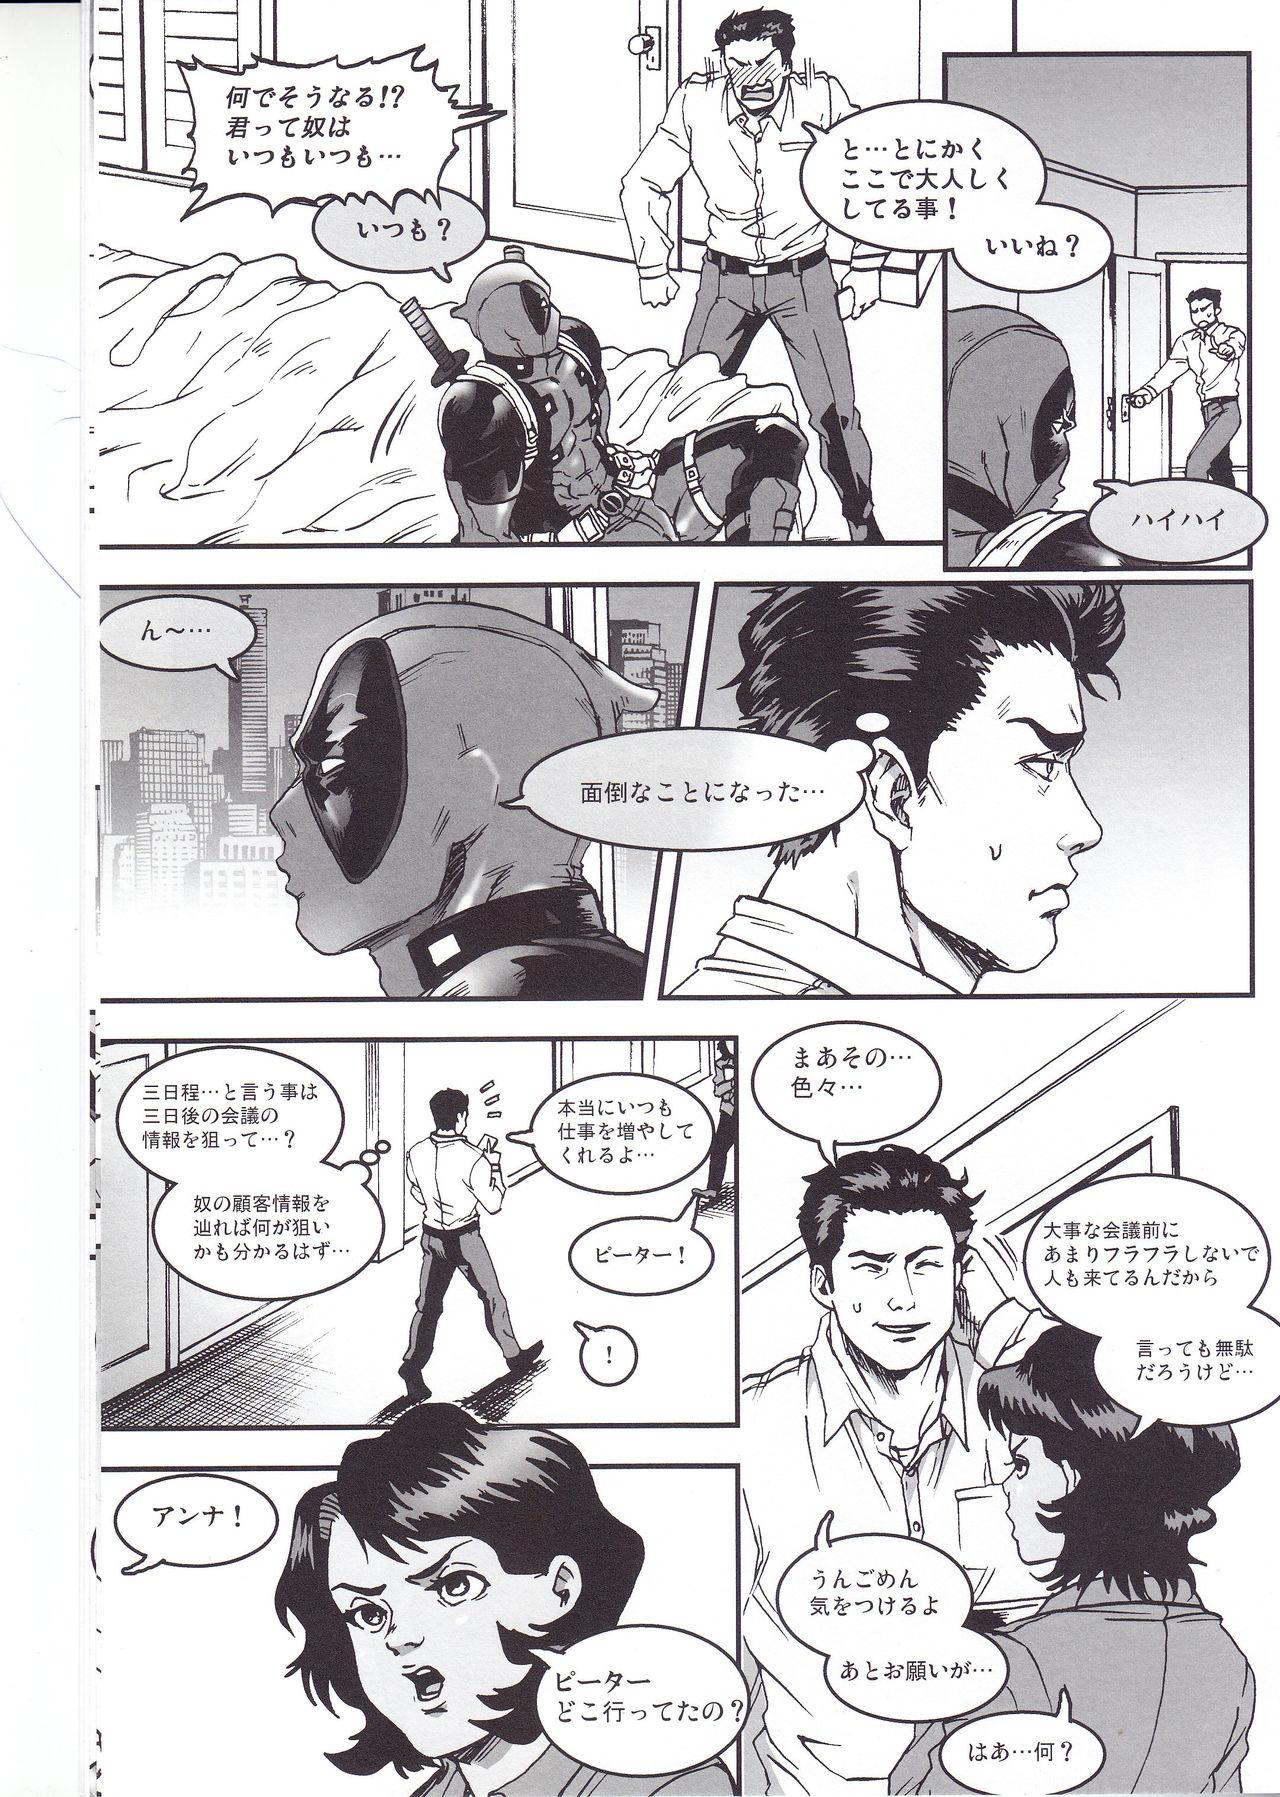 Pounded THREE DAYS 1 - Spider-man Deadpool Couple Fucking - Page 9